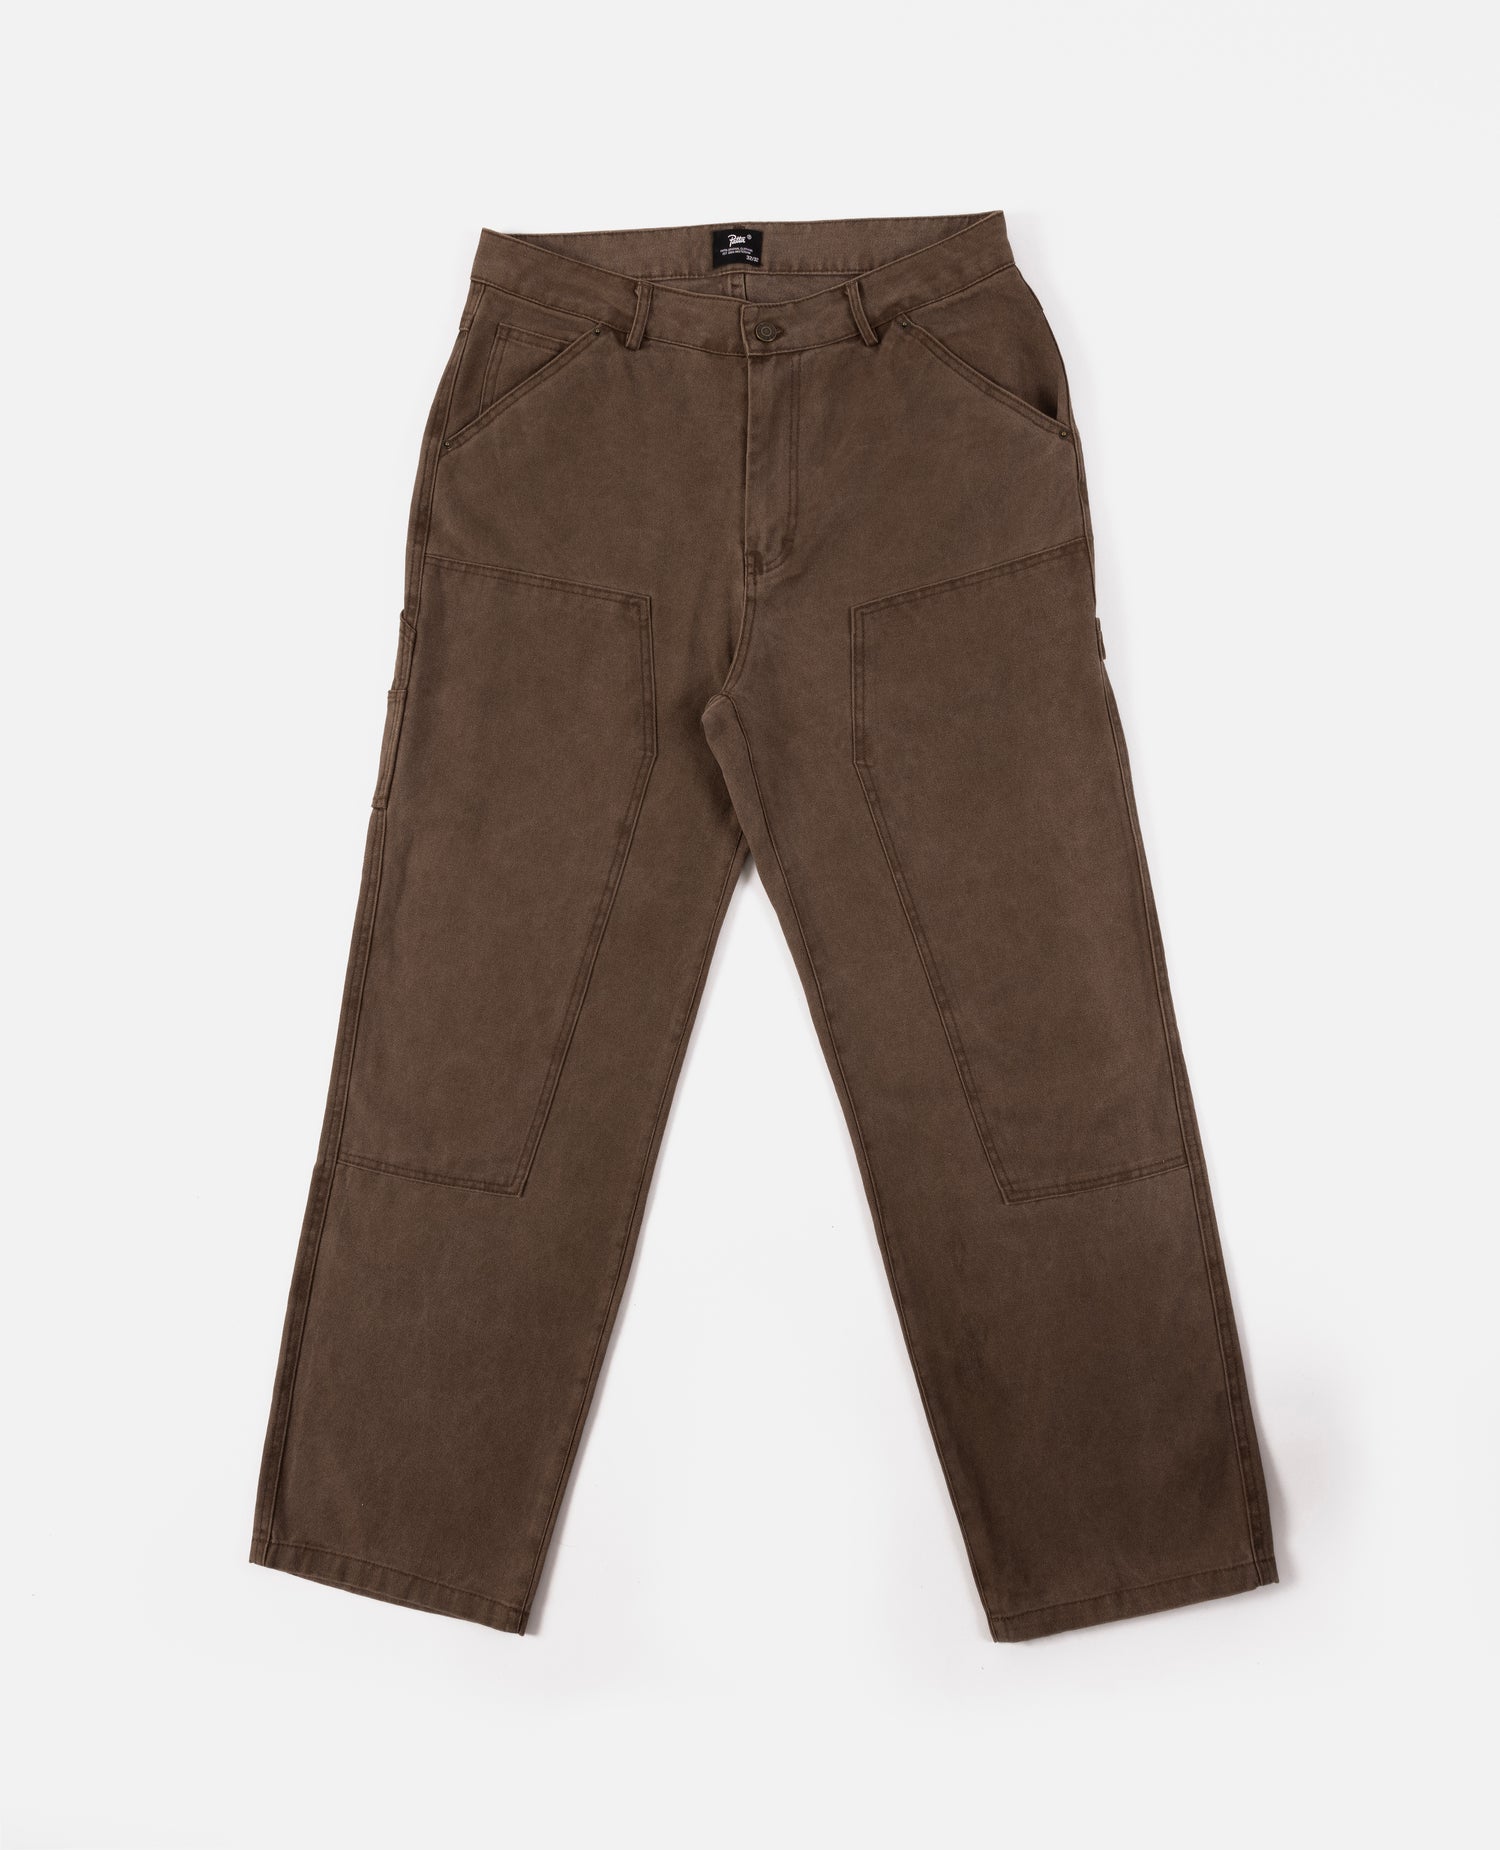 Patta Canvas Painter Pants (Washed Brown)